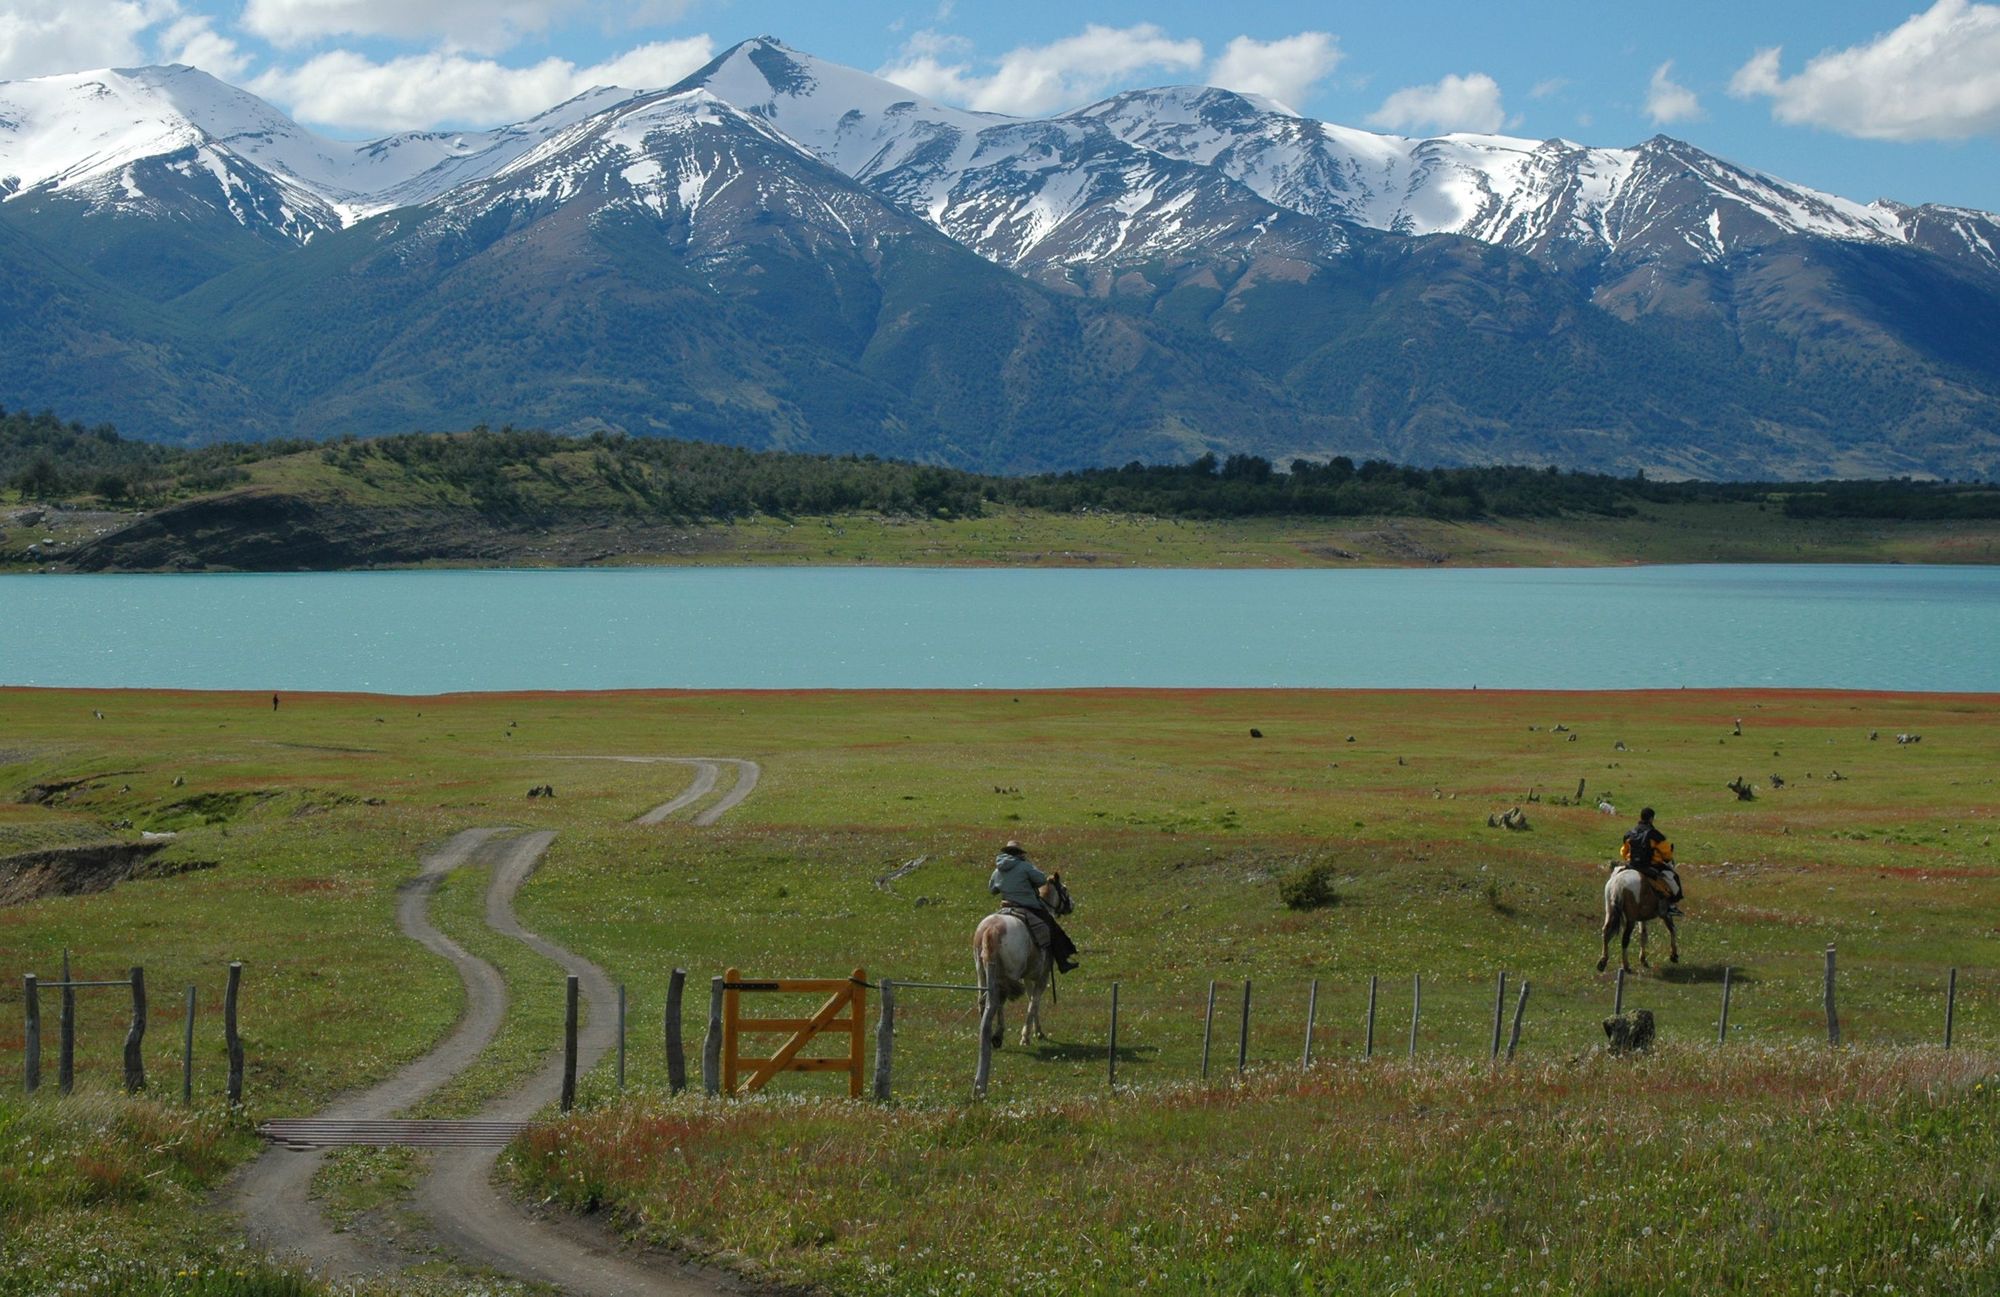 Horseback riders in Argentina, with the Andes mountains behind.